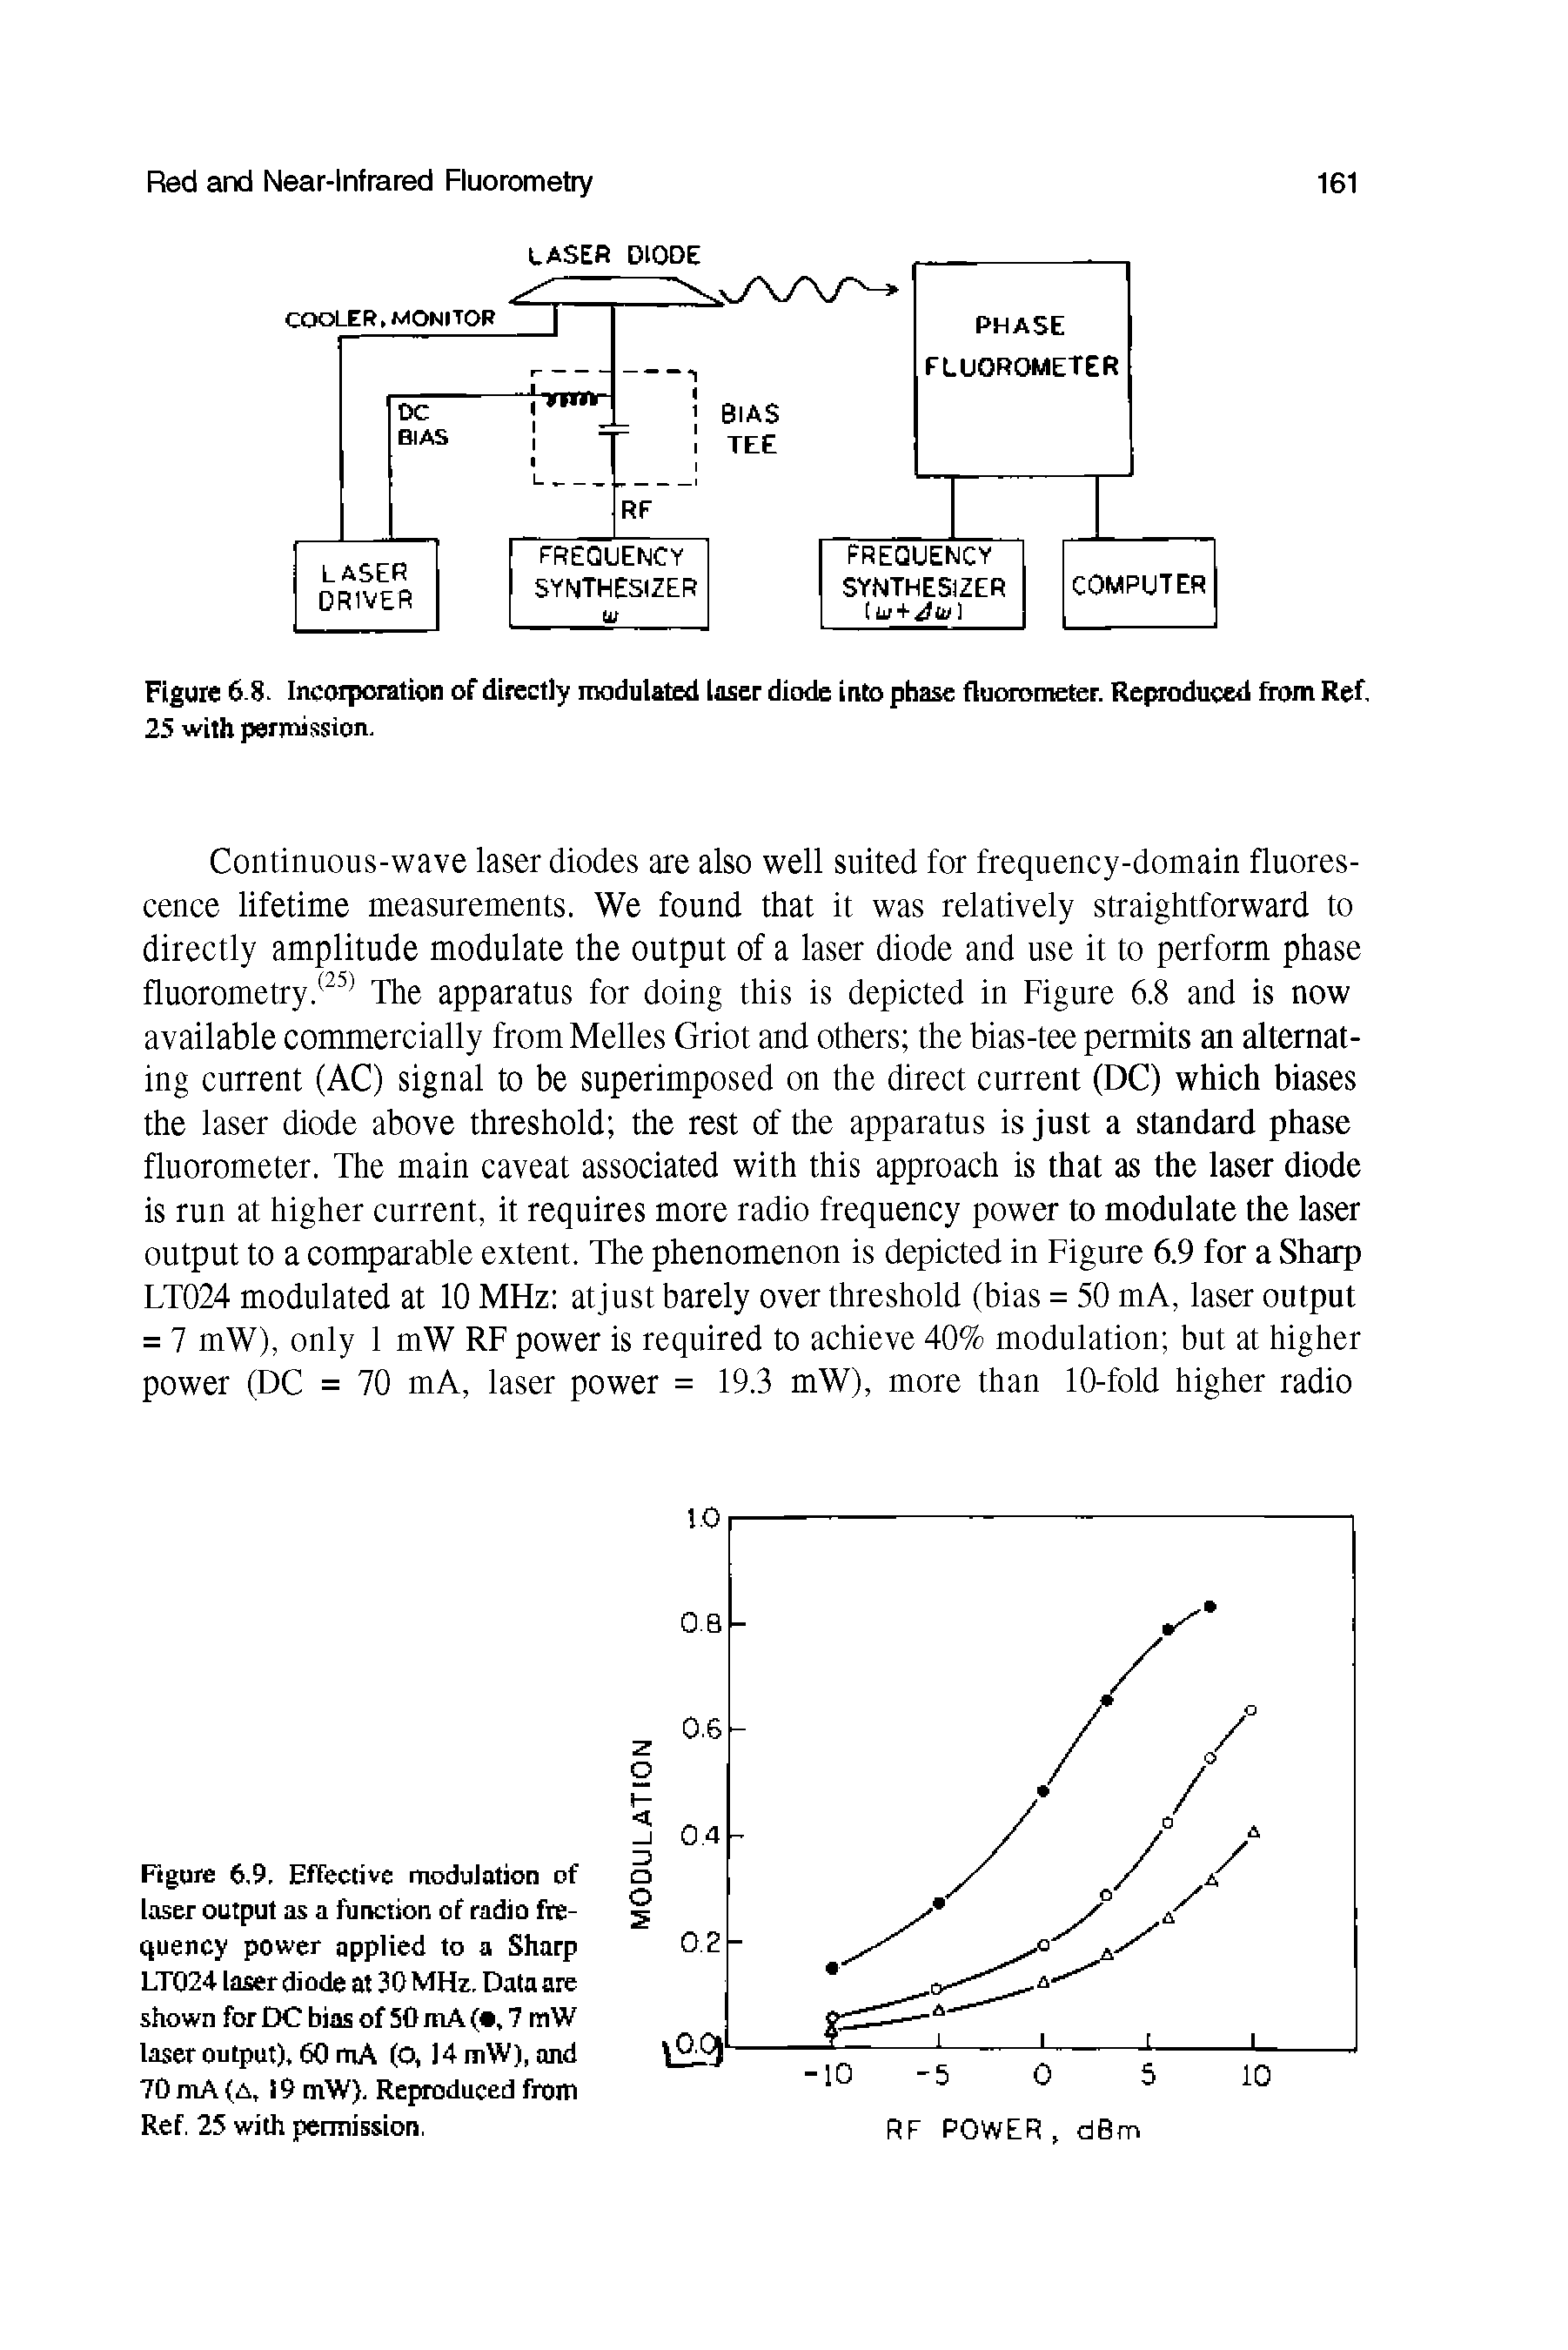 Figure 6-8. Incorporation of directly modulated loser diode into phase fluorometer. Reproduced from Ref. 25 with permission.